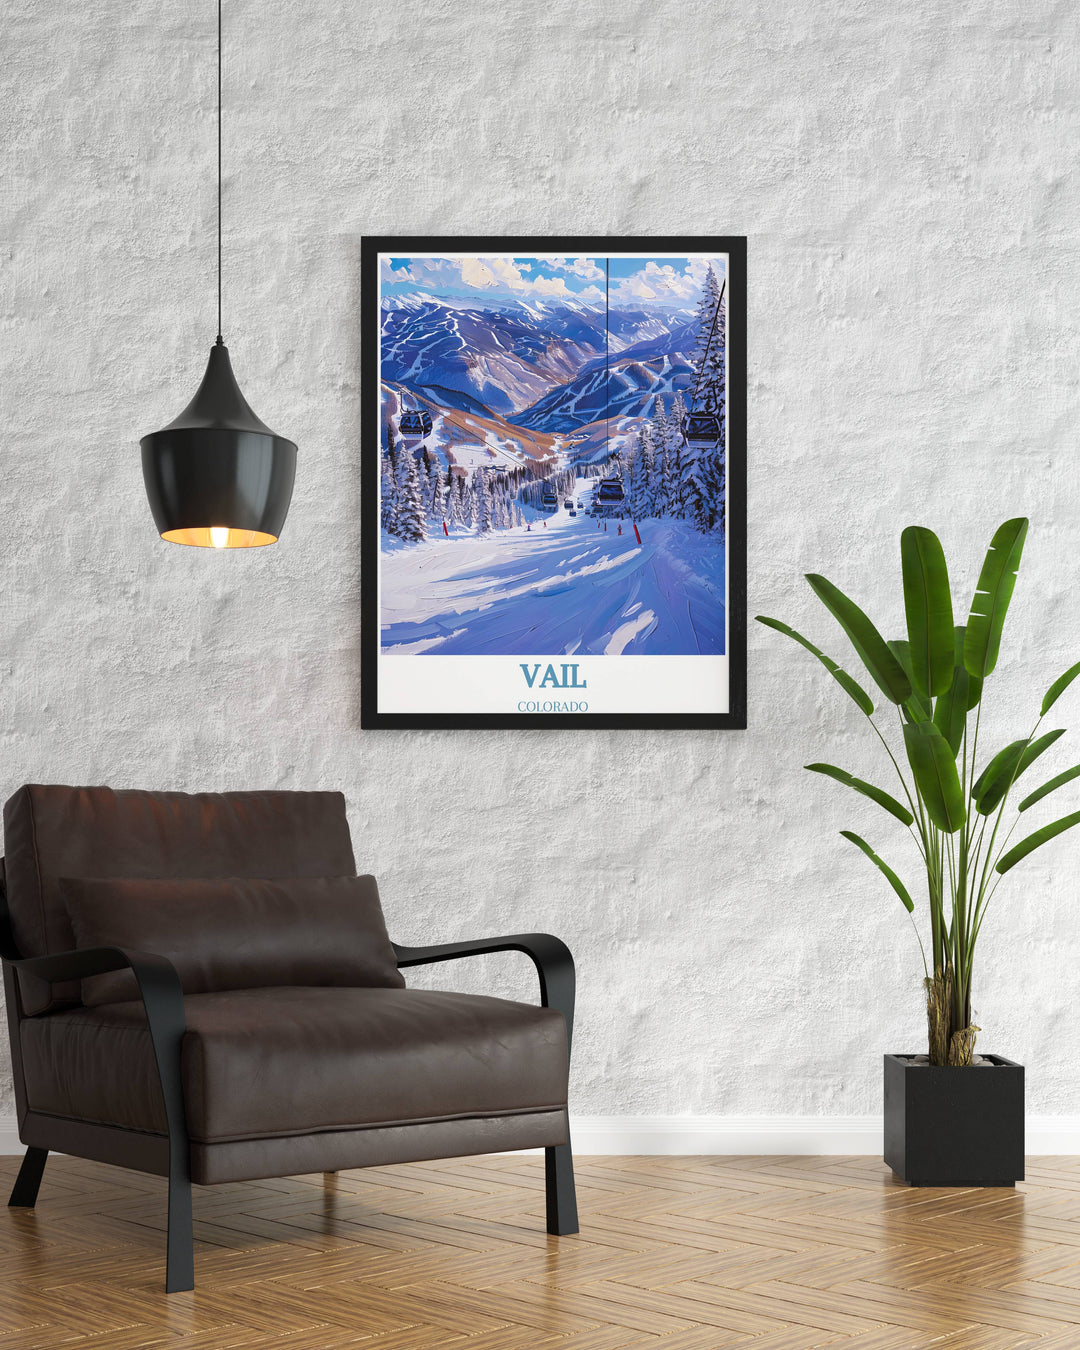 Scenic artwork of Vail Ski Resort highlighting the luxurious accommodations, lively après ski scene, and breathtaking views. Perfect for those who love mountain landscapes and winter sports.